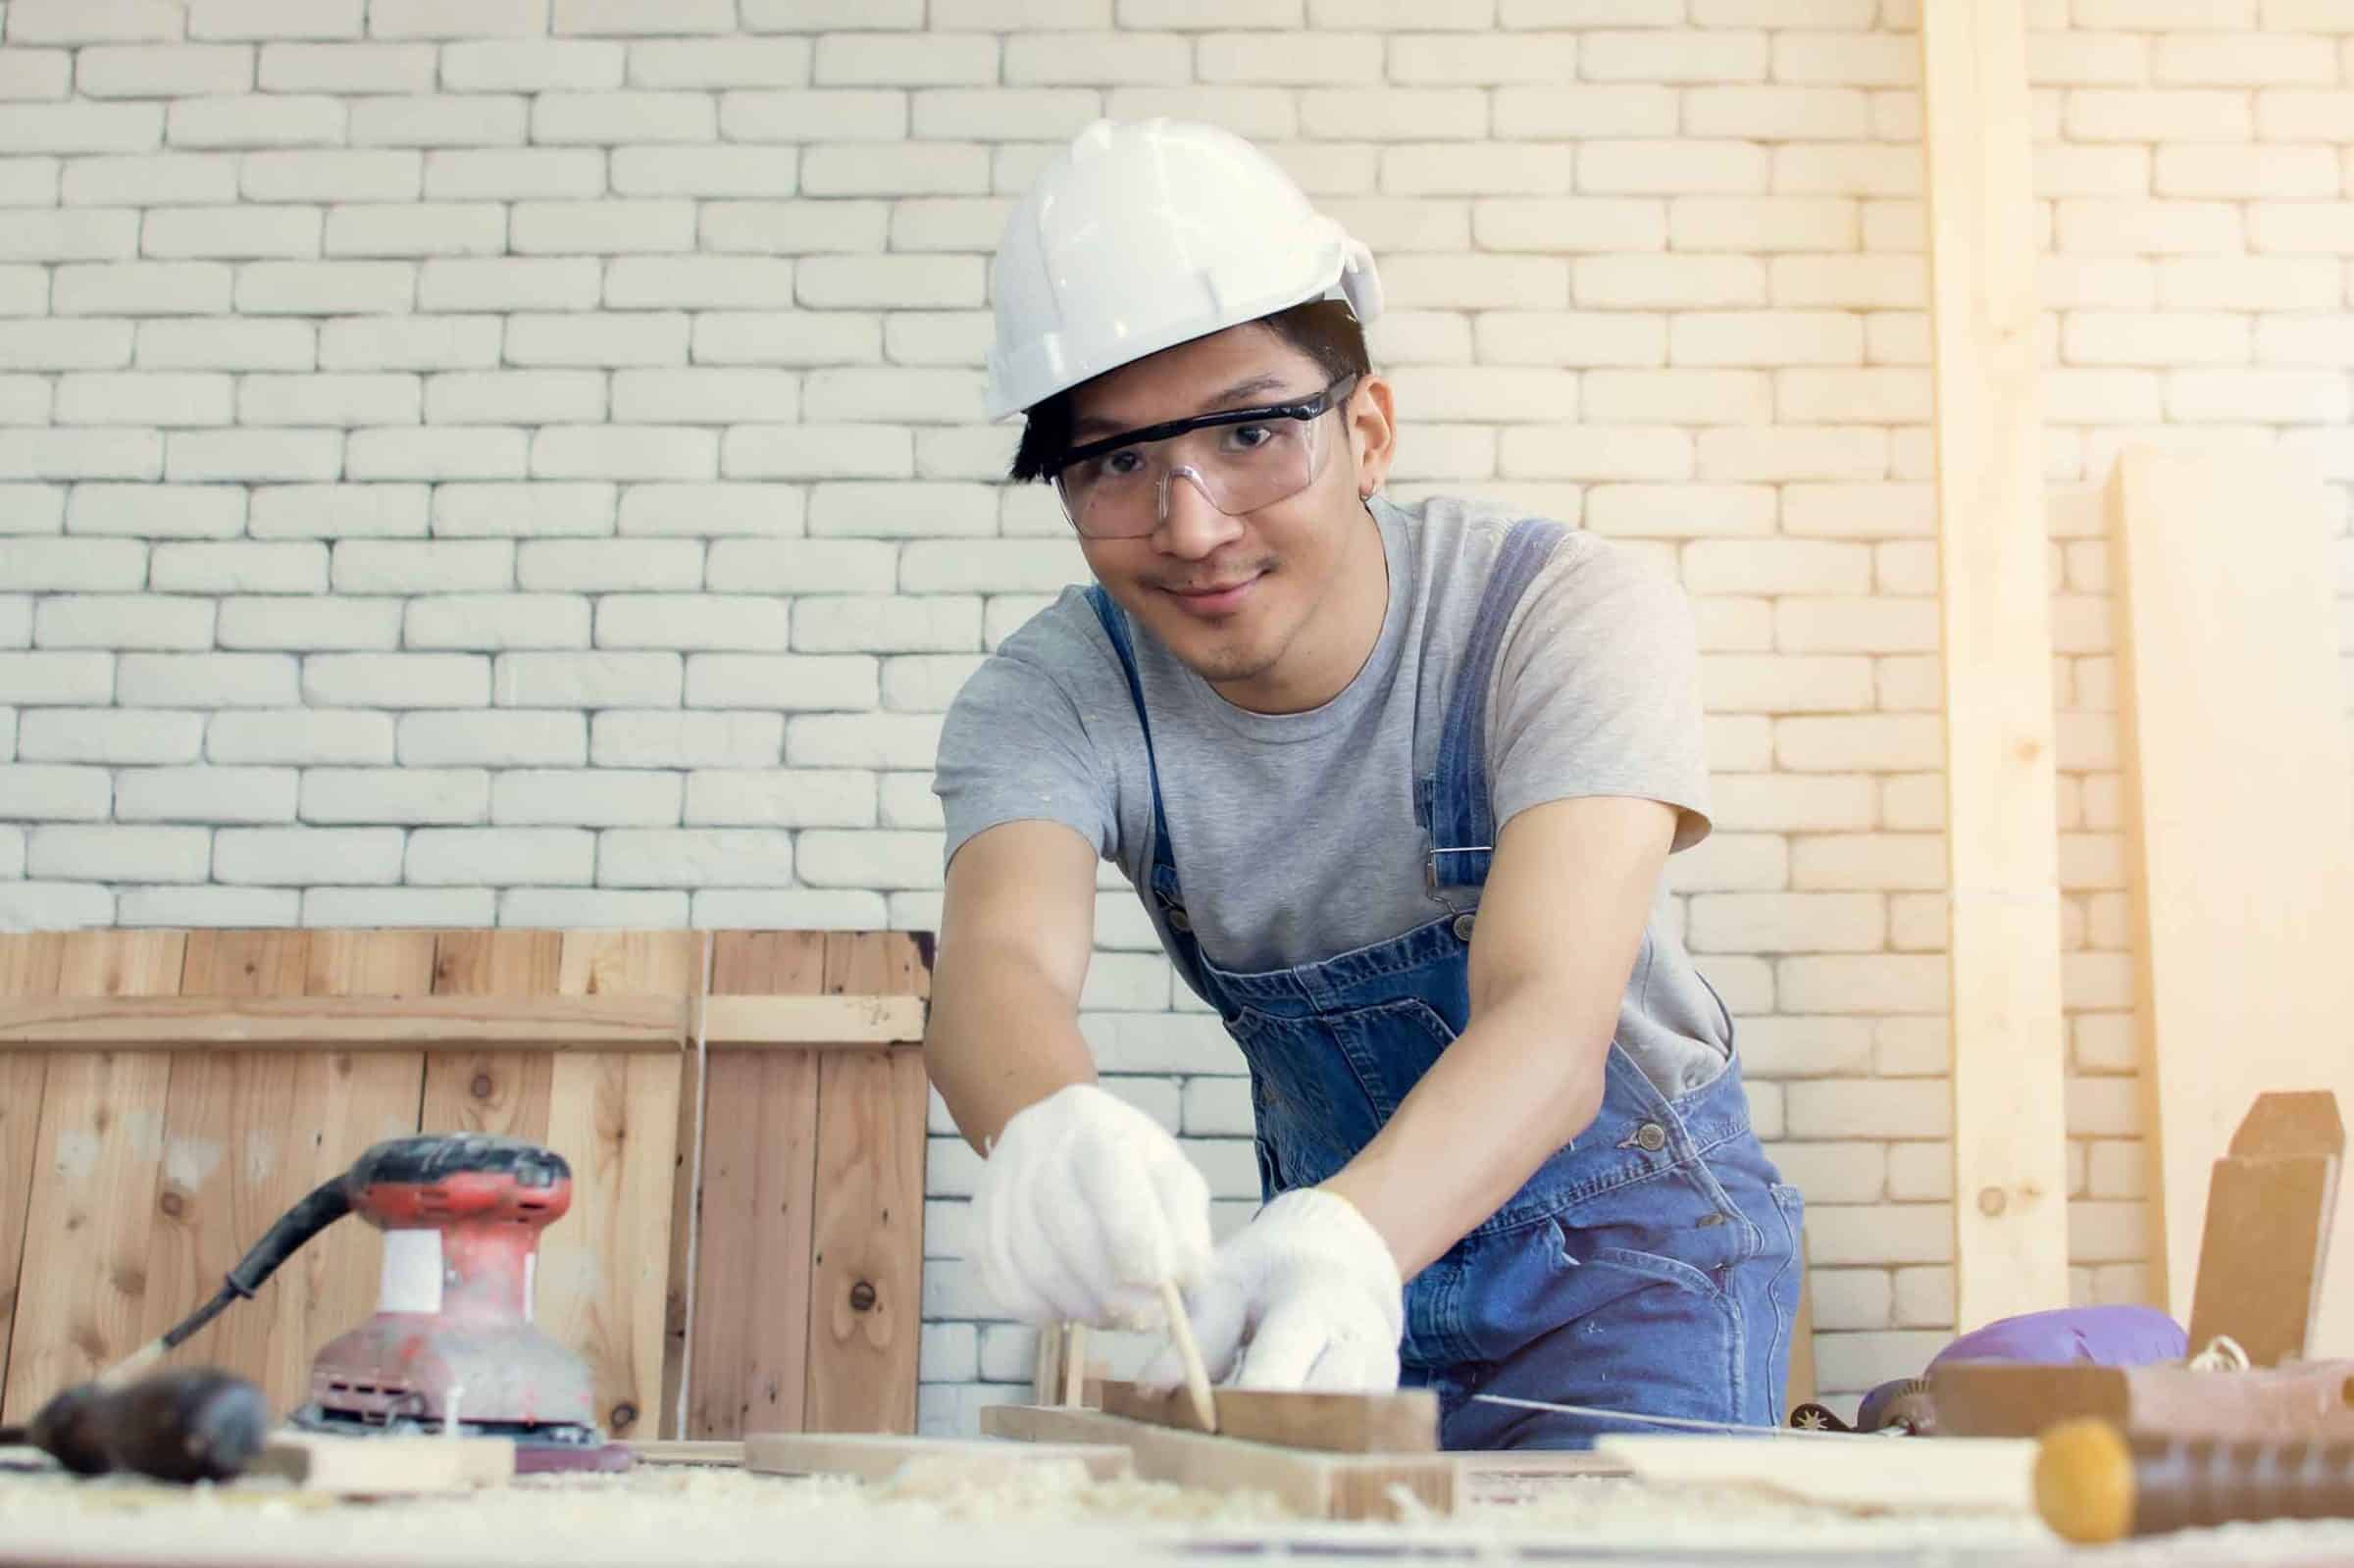 Construction worker smiling while sanding wood